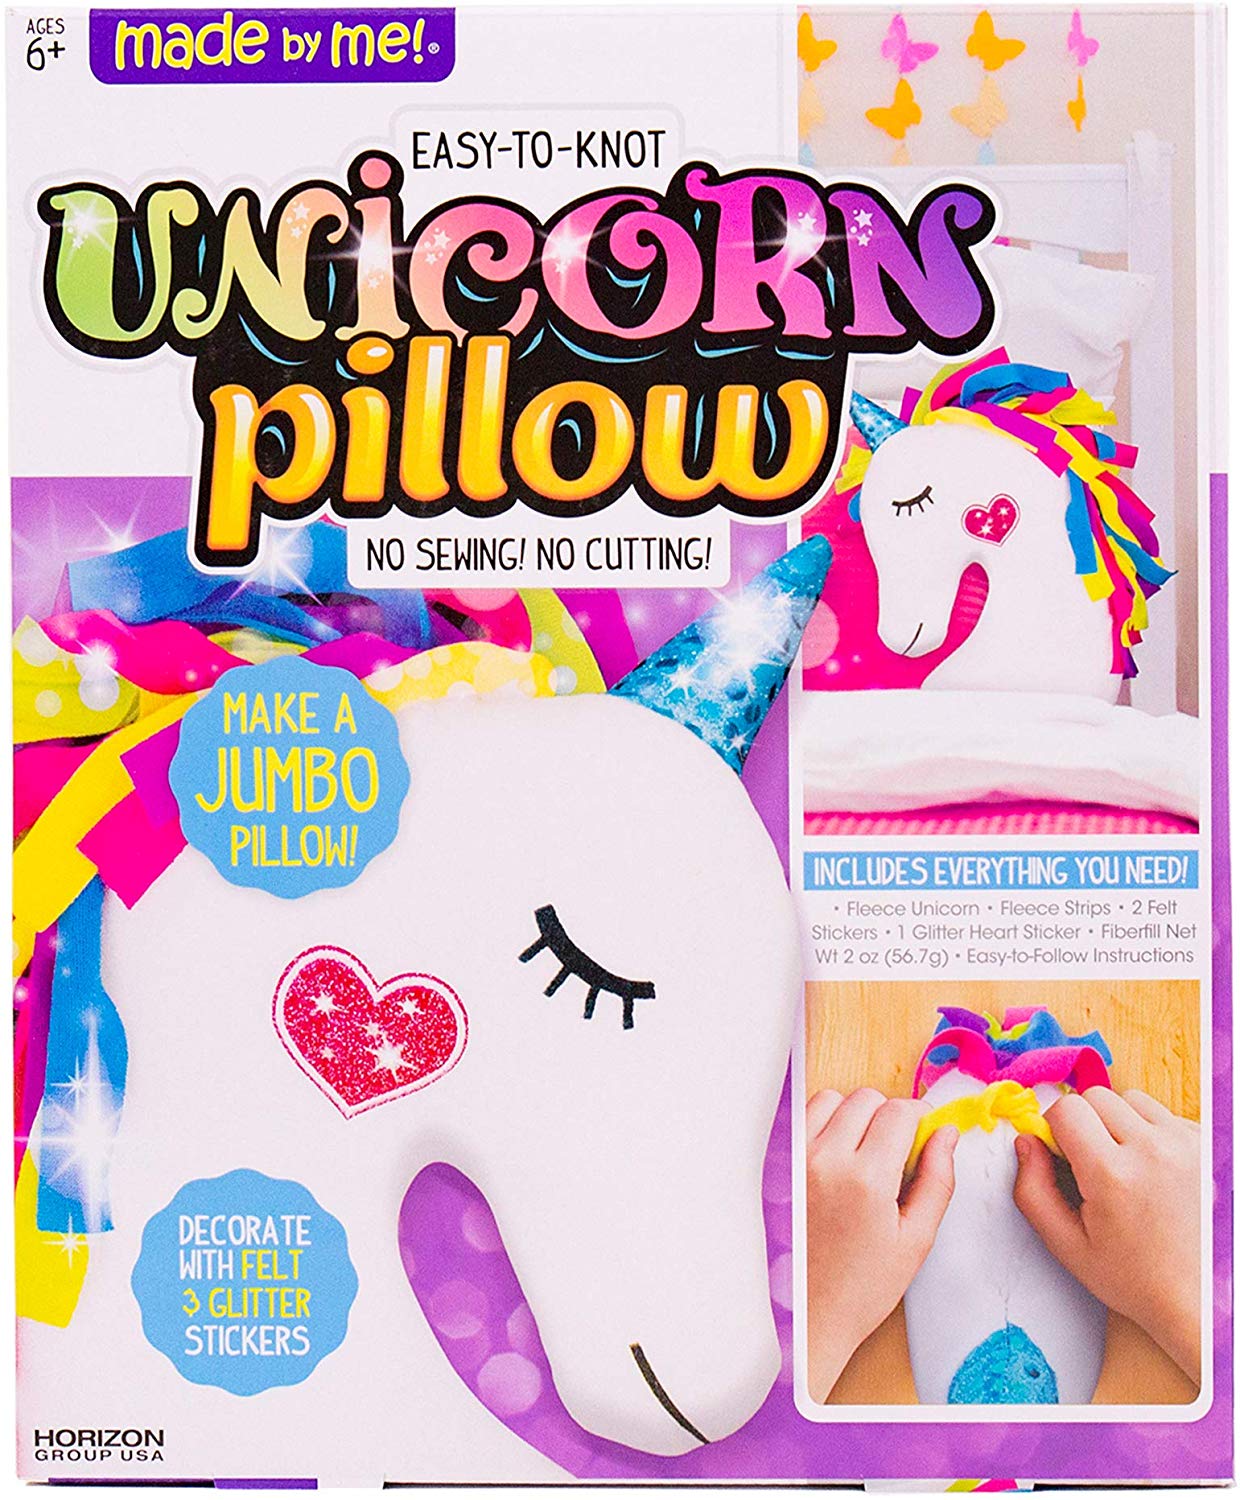 https://www.momtastic.com/wp-content/uploads/sites/5/gallery/11-craft-projects-under-15-on-amazon-prime-to-keep-kids-busy/unicorn-pillow.jpg